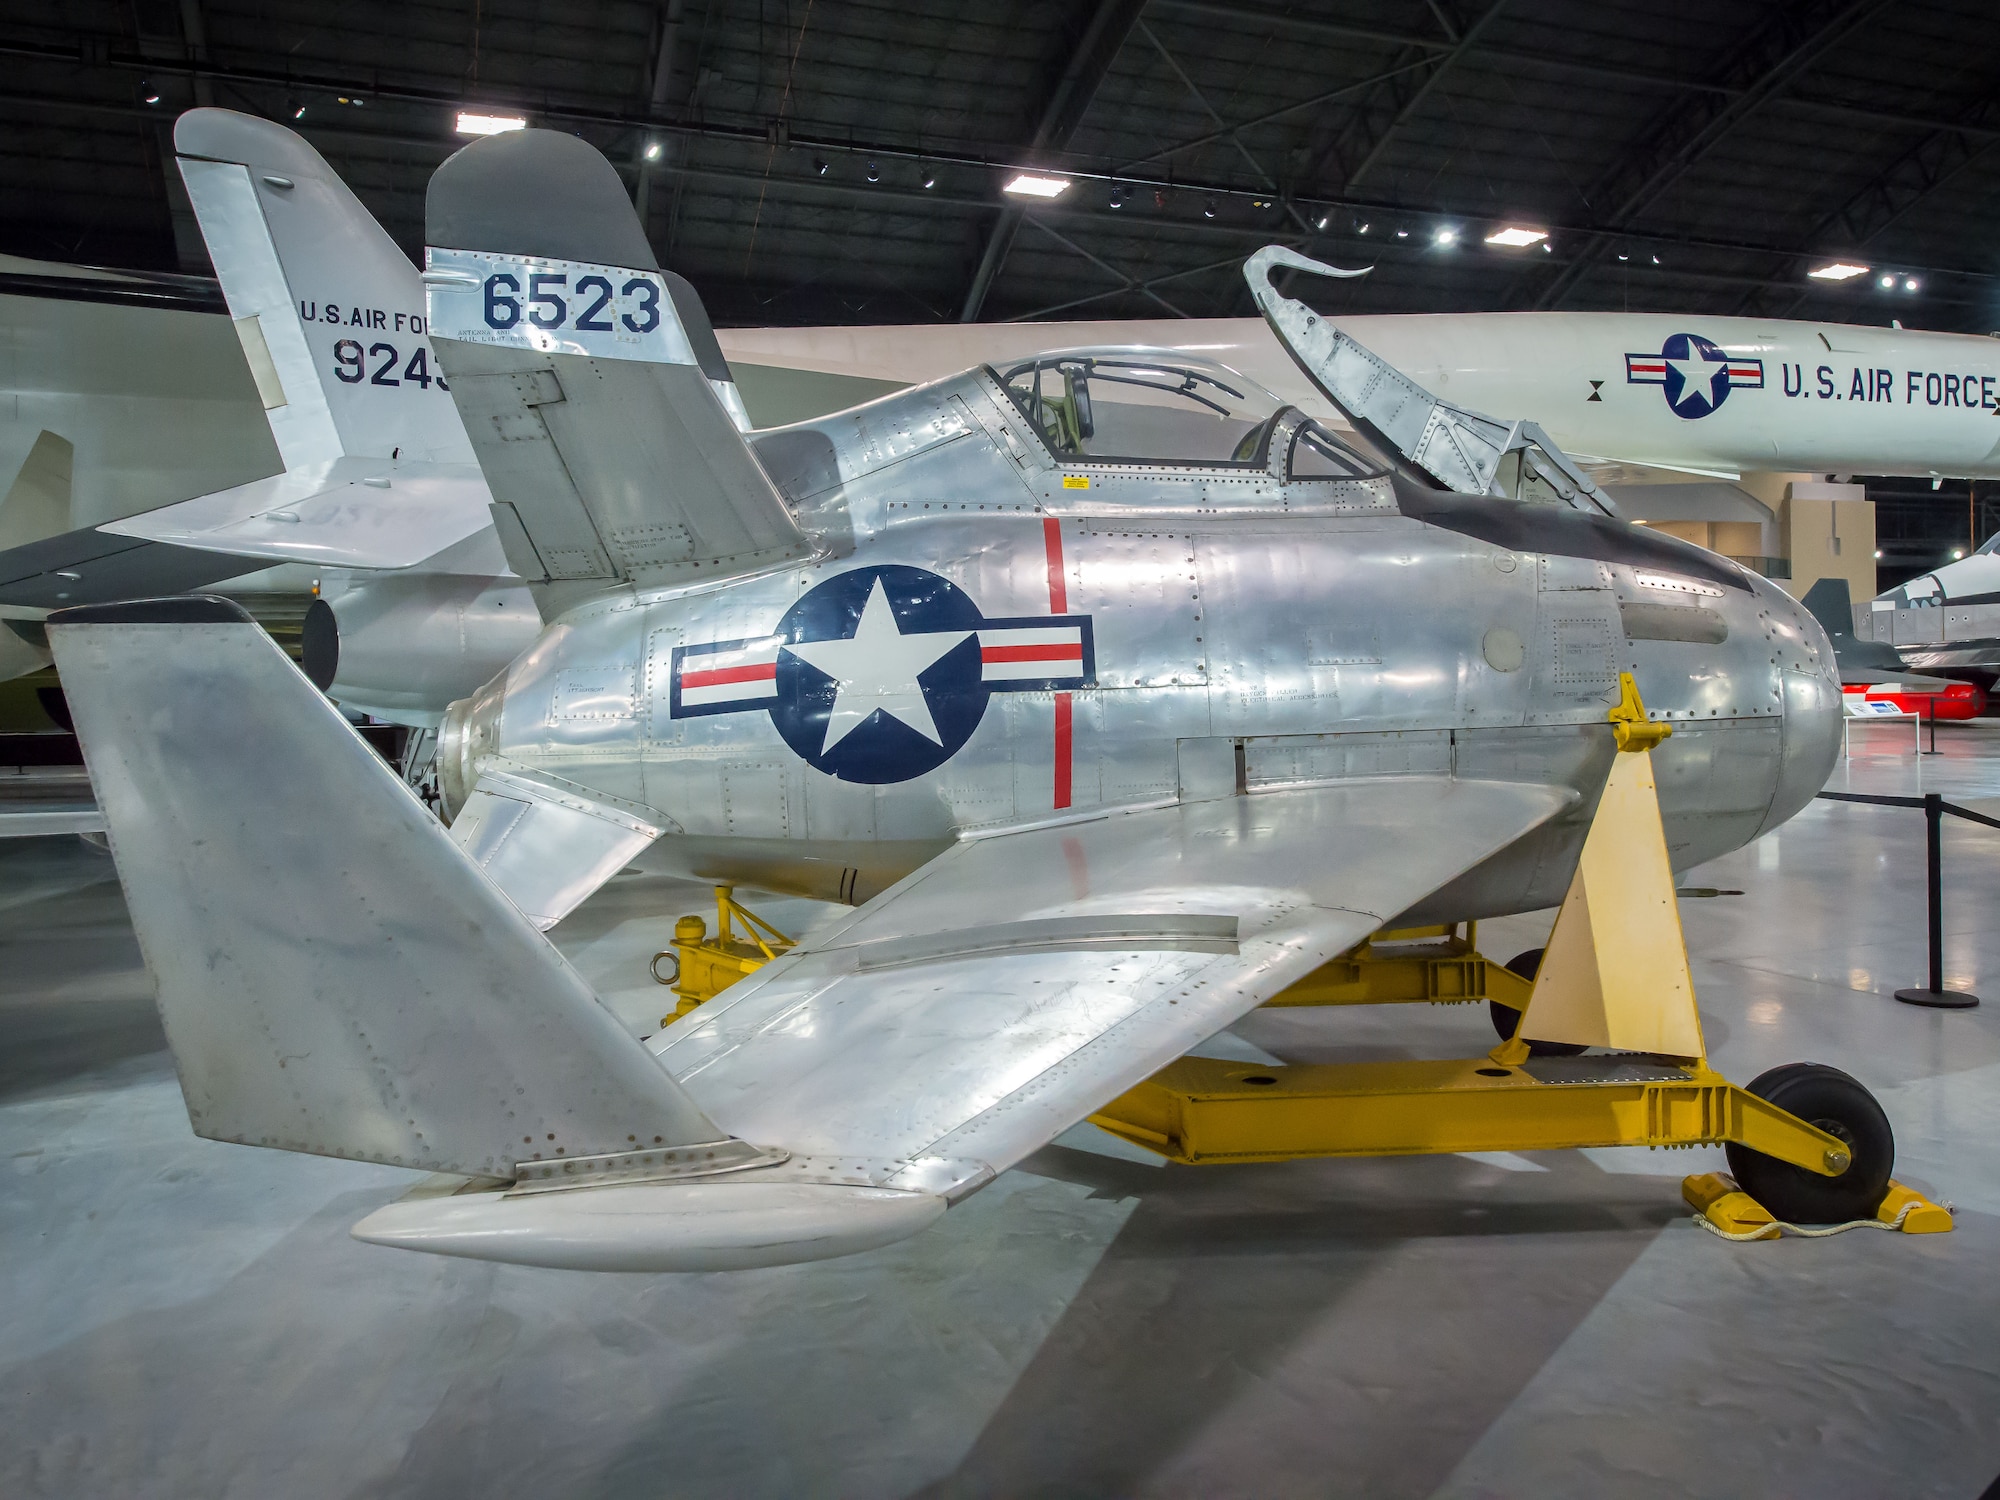 Dayton, Ohio -- McDonnell XF-85 Goblin in the R&D Gallery at the National Museum of the U.S. Air Force (U.S. Air Force photo by Jim Copes)